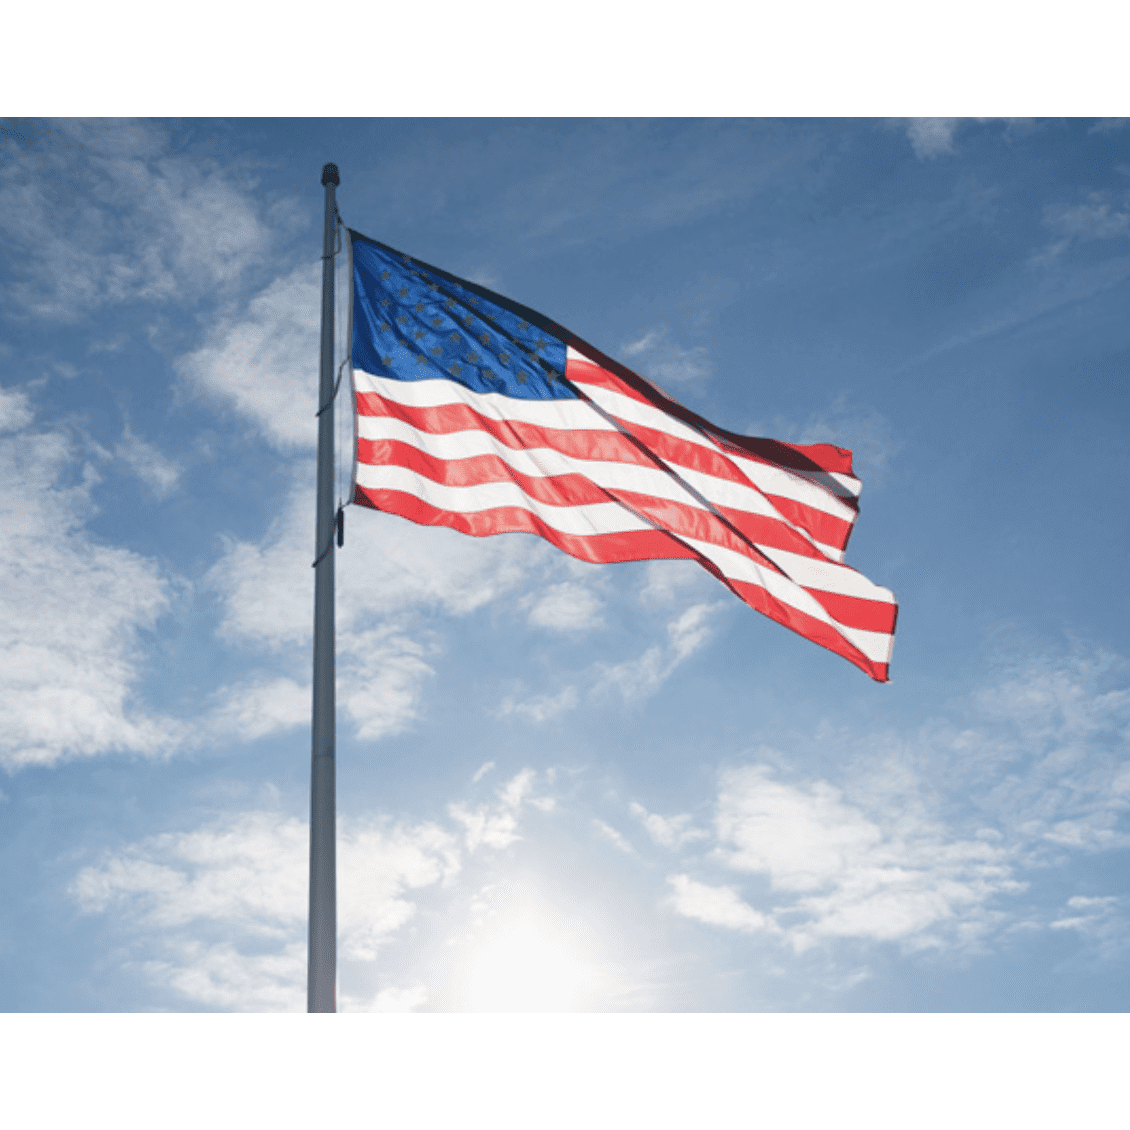 Collins/Eder Flag USA Flag-Commercial-Poly-Max Embroidered -3x5,4x6,5x8,6x10,50x80 ft (Made in America)